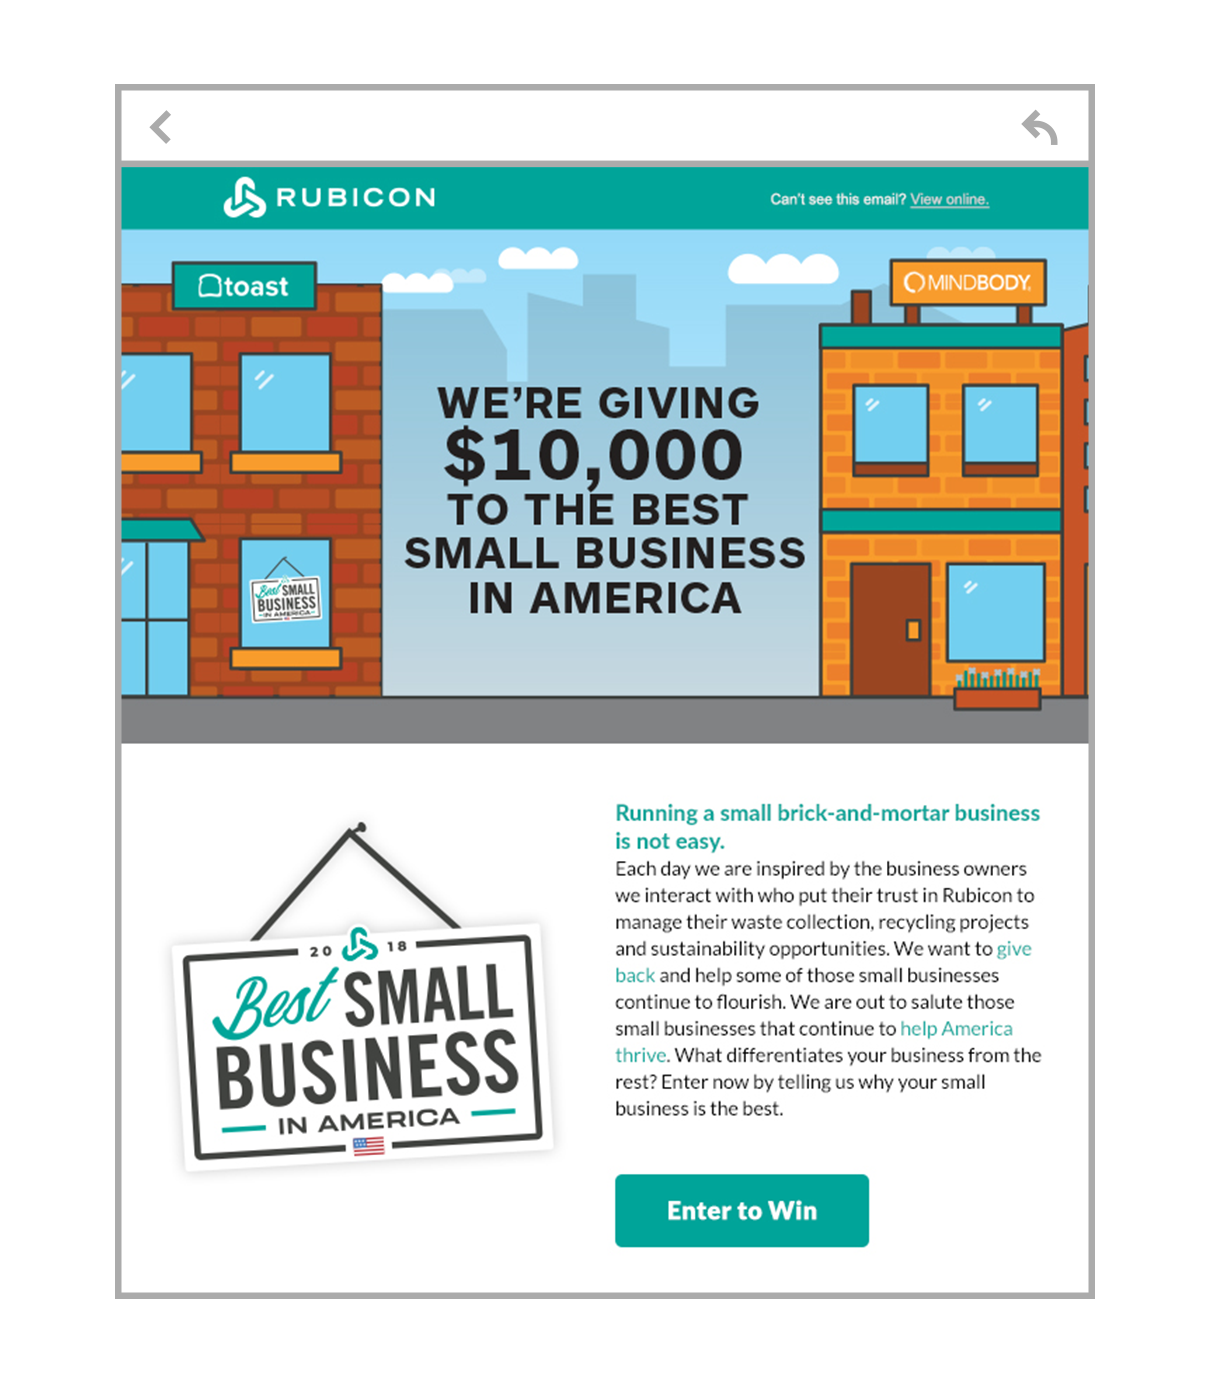 Rubicon's Best Small Business in America email campaign